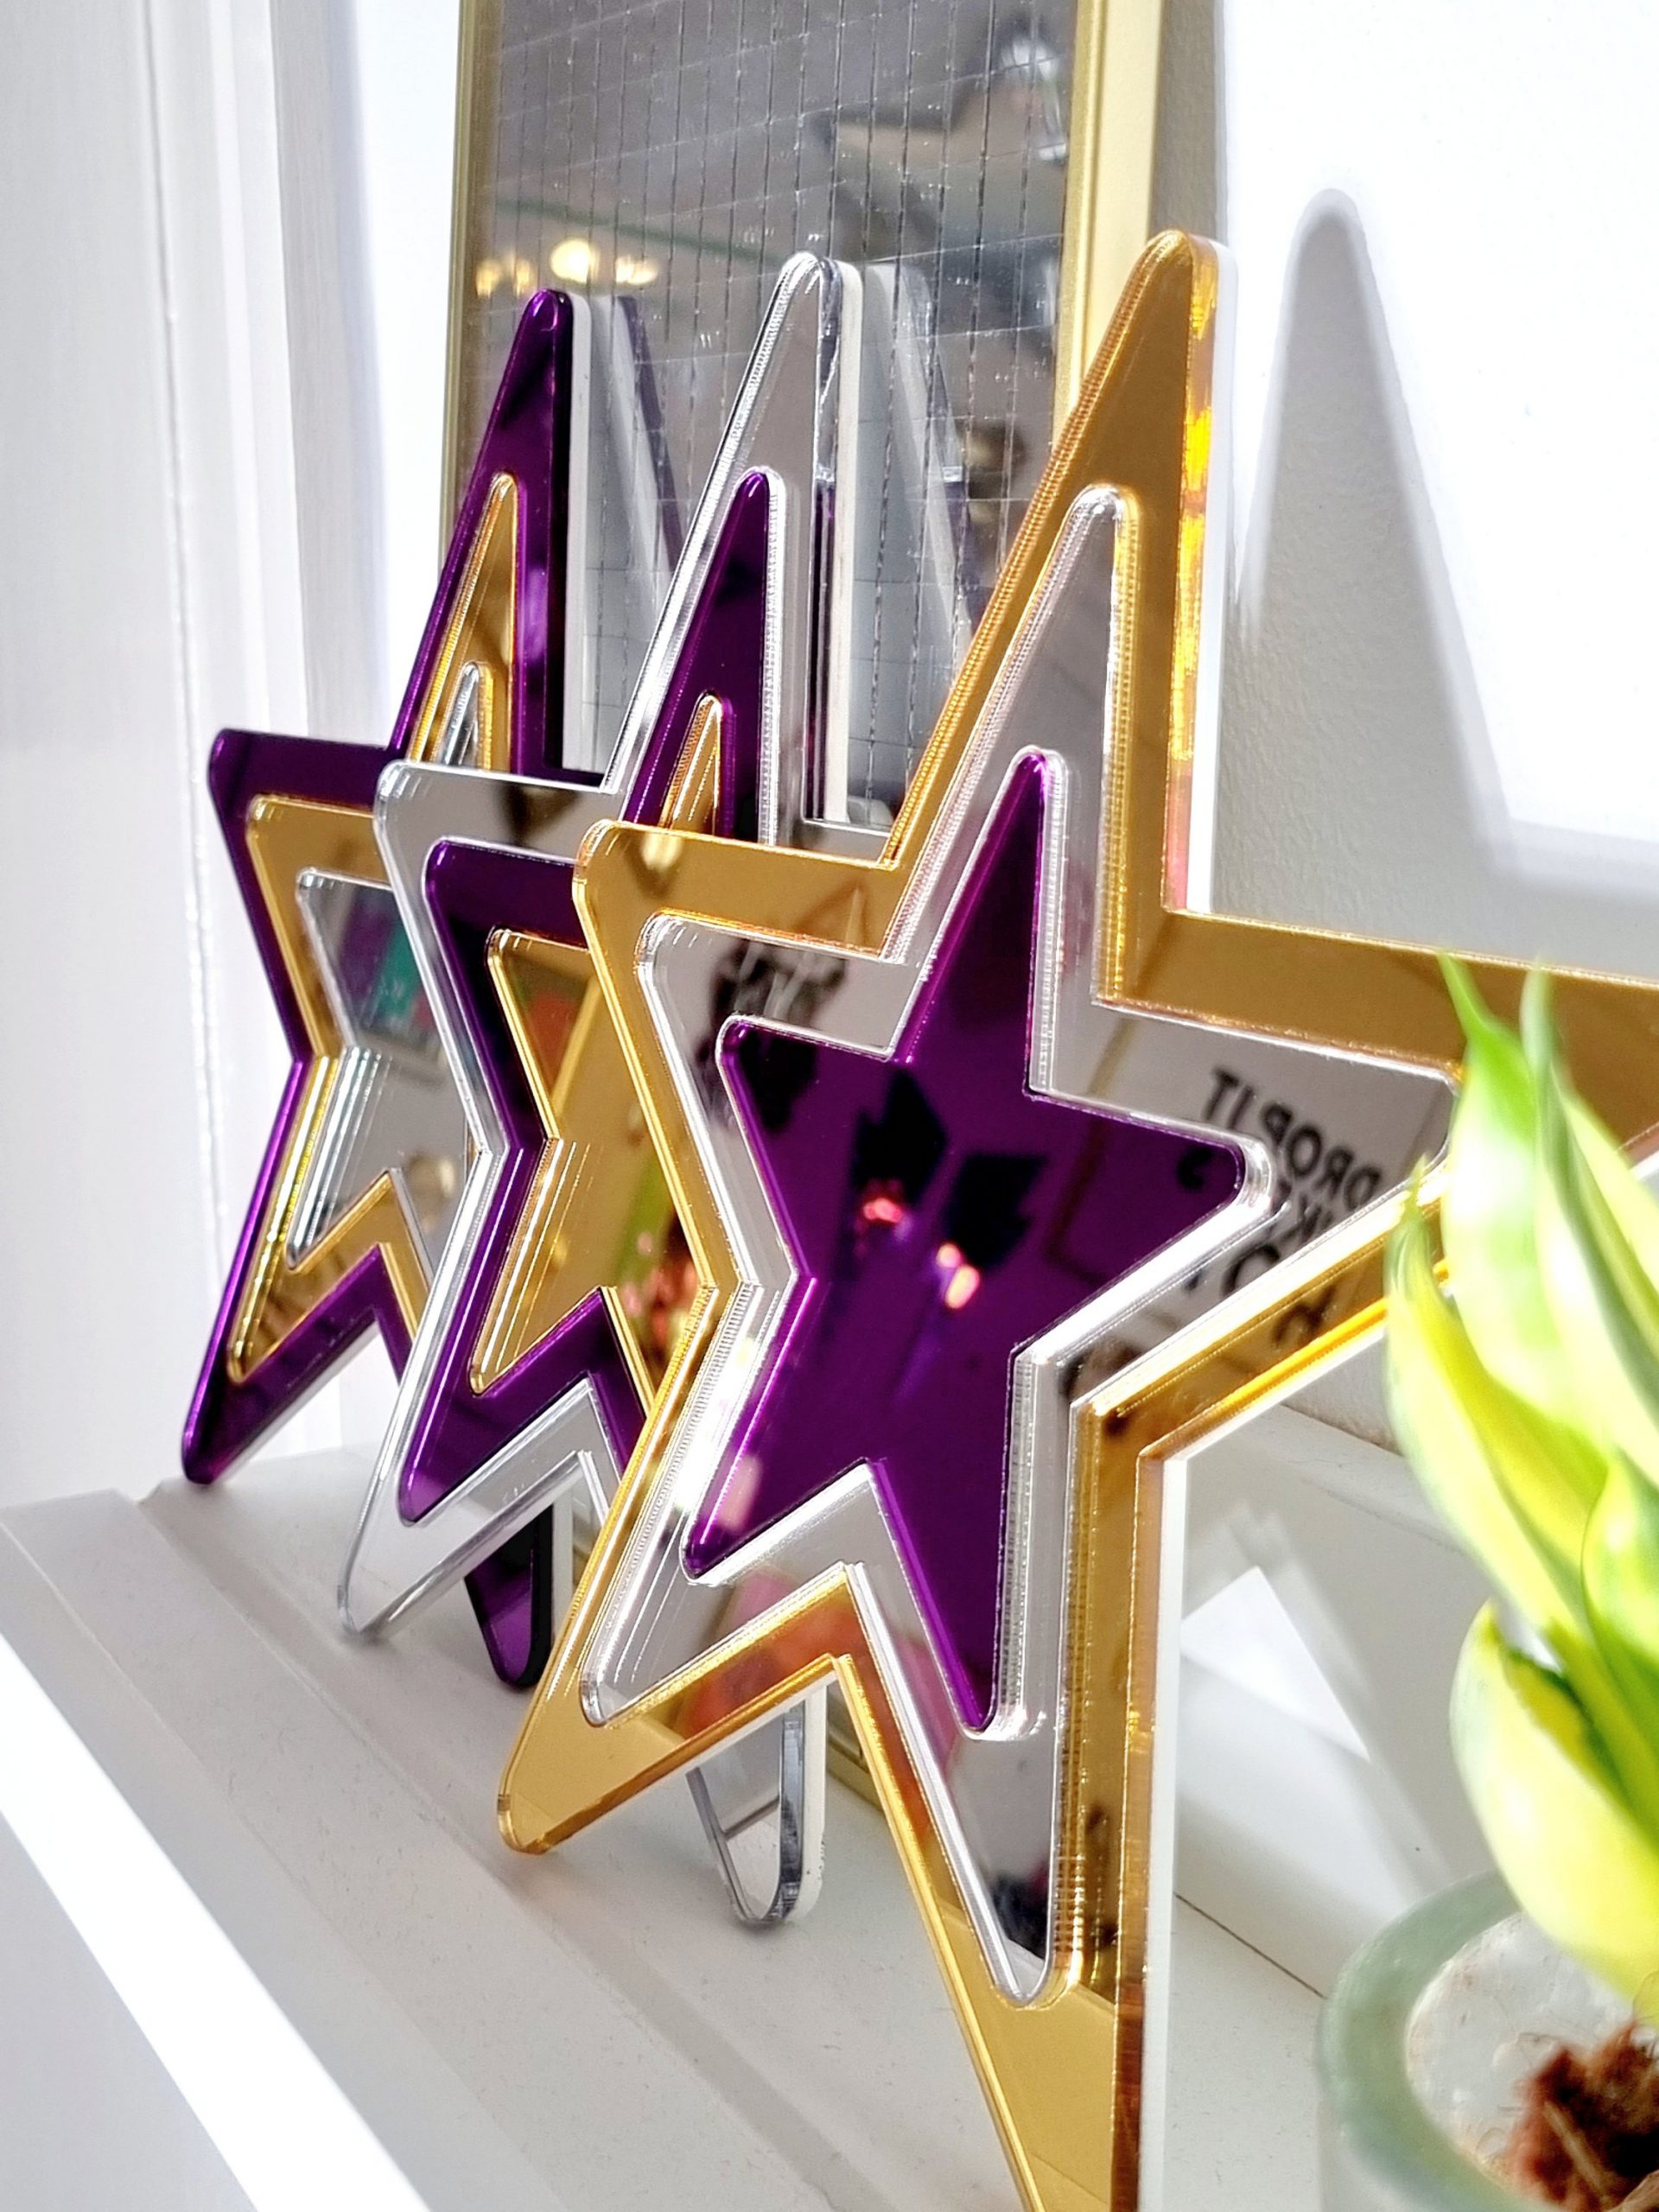 Set of mirror stars made from gold, purple and silver acrylic.